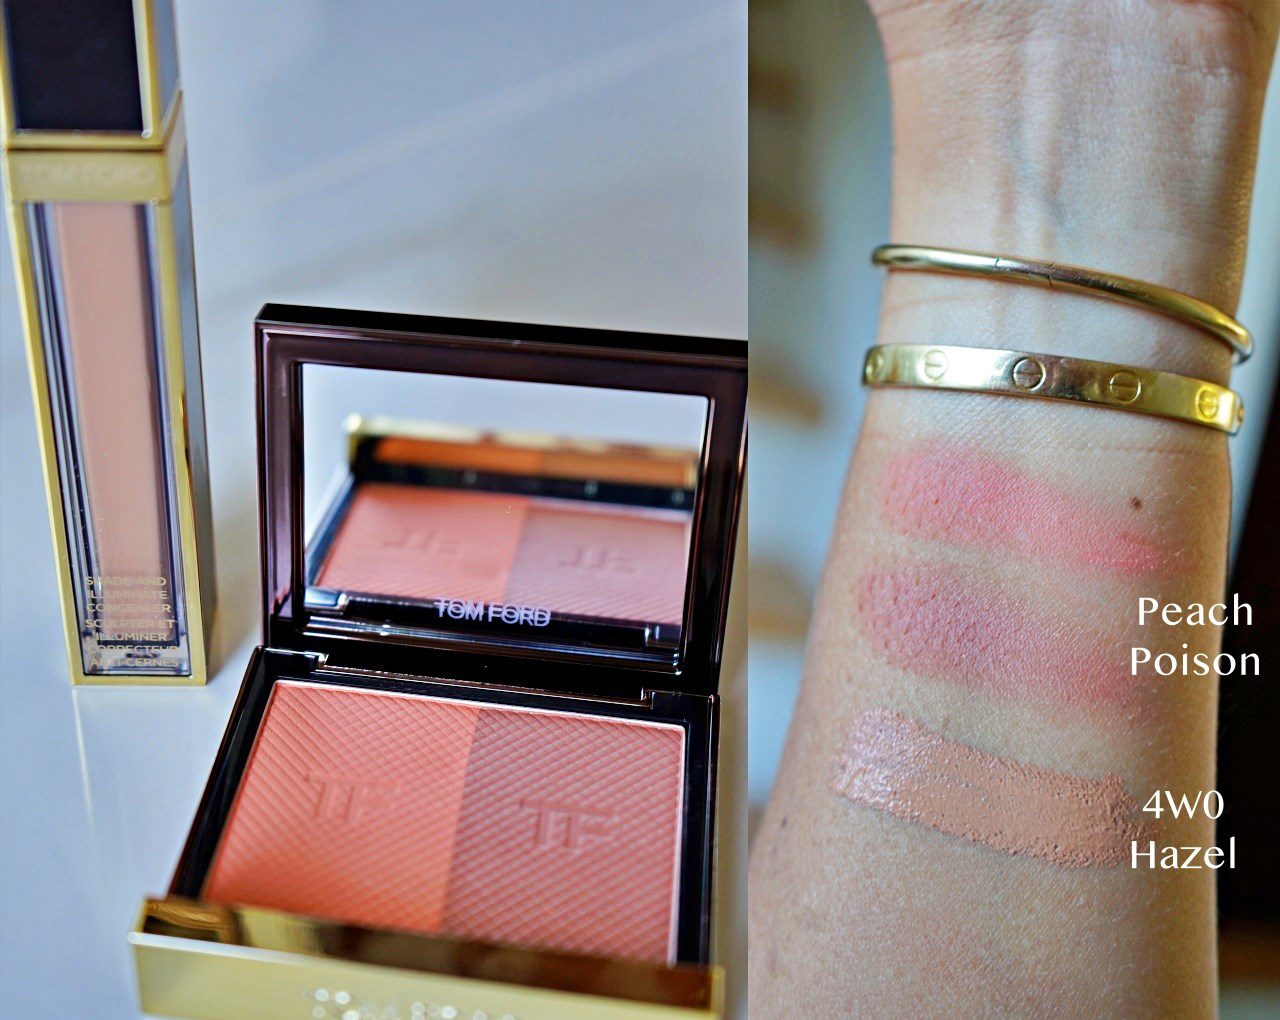 TOM FORD BEAUTY LAUNCHES swatches